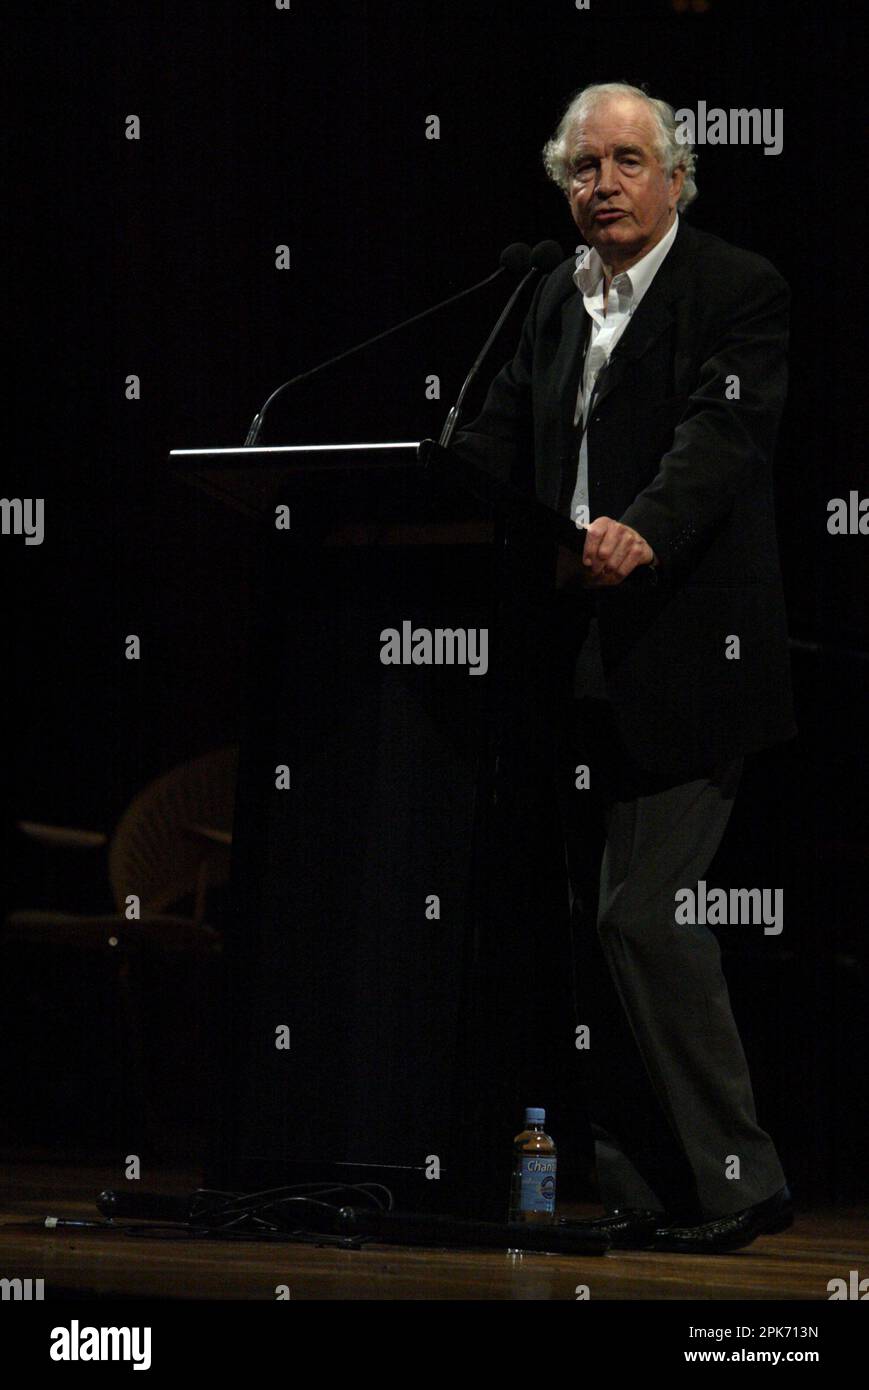 Stuart Rees introducing John Pilger, awarded the annual Sydney Peace Prize for 2009 and delivering his 'Breaking The Silence' speech at Sydney Opera House Sydney, Australia - 05.11.09 Stock Photo